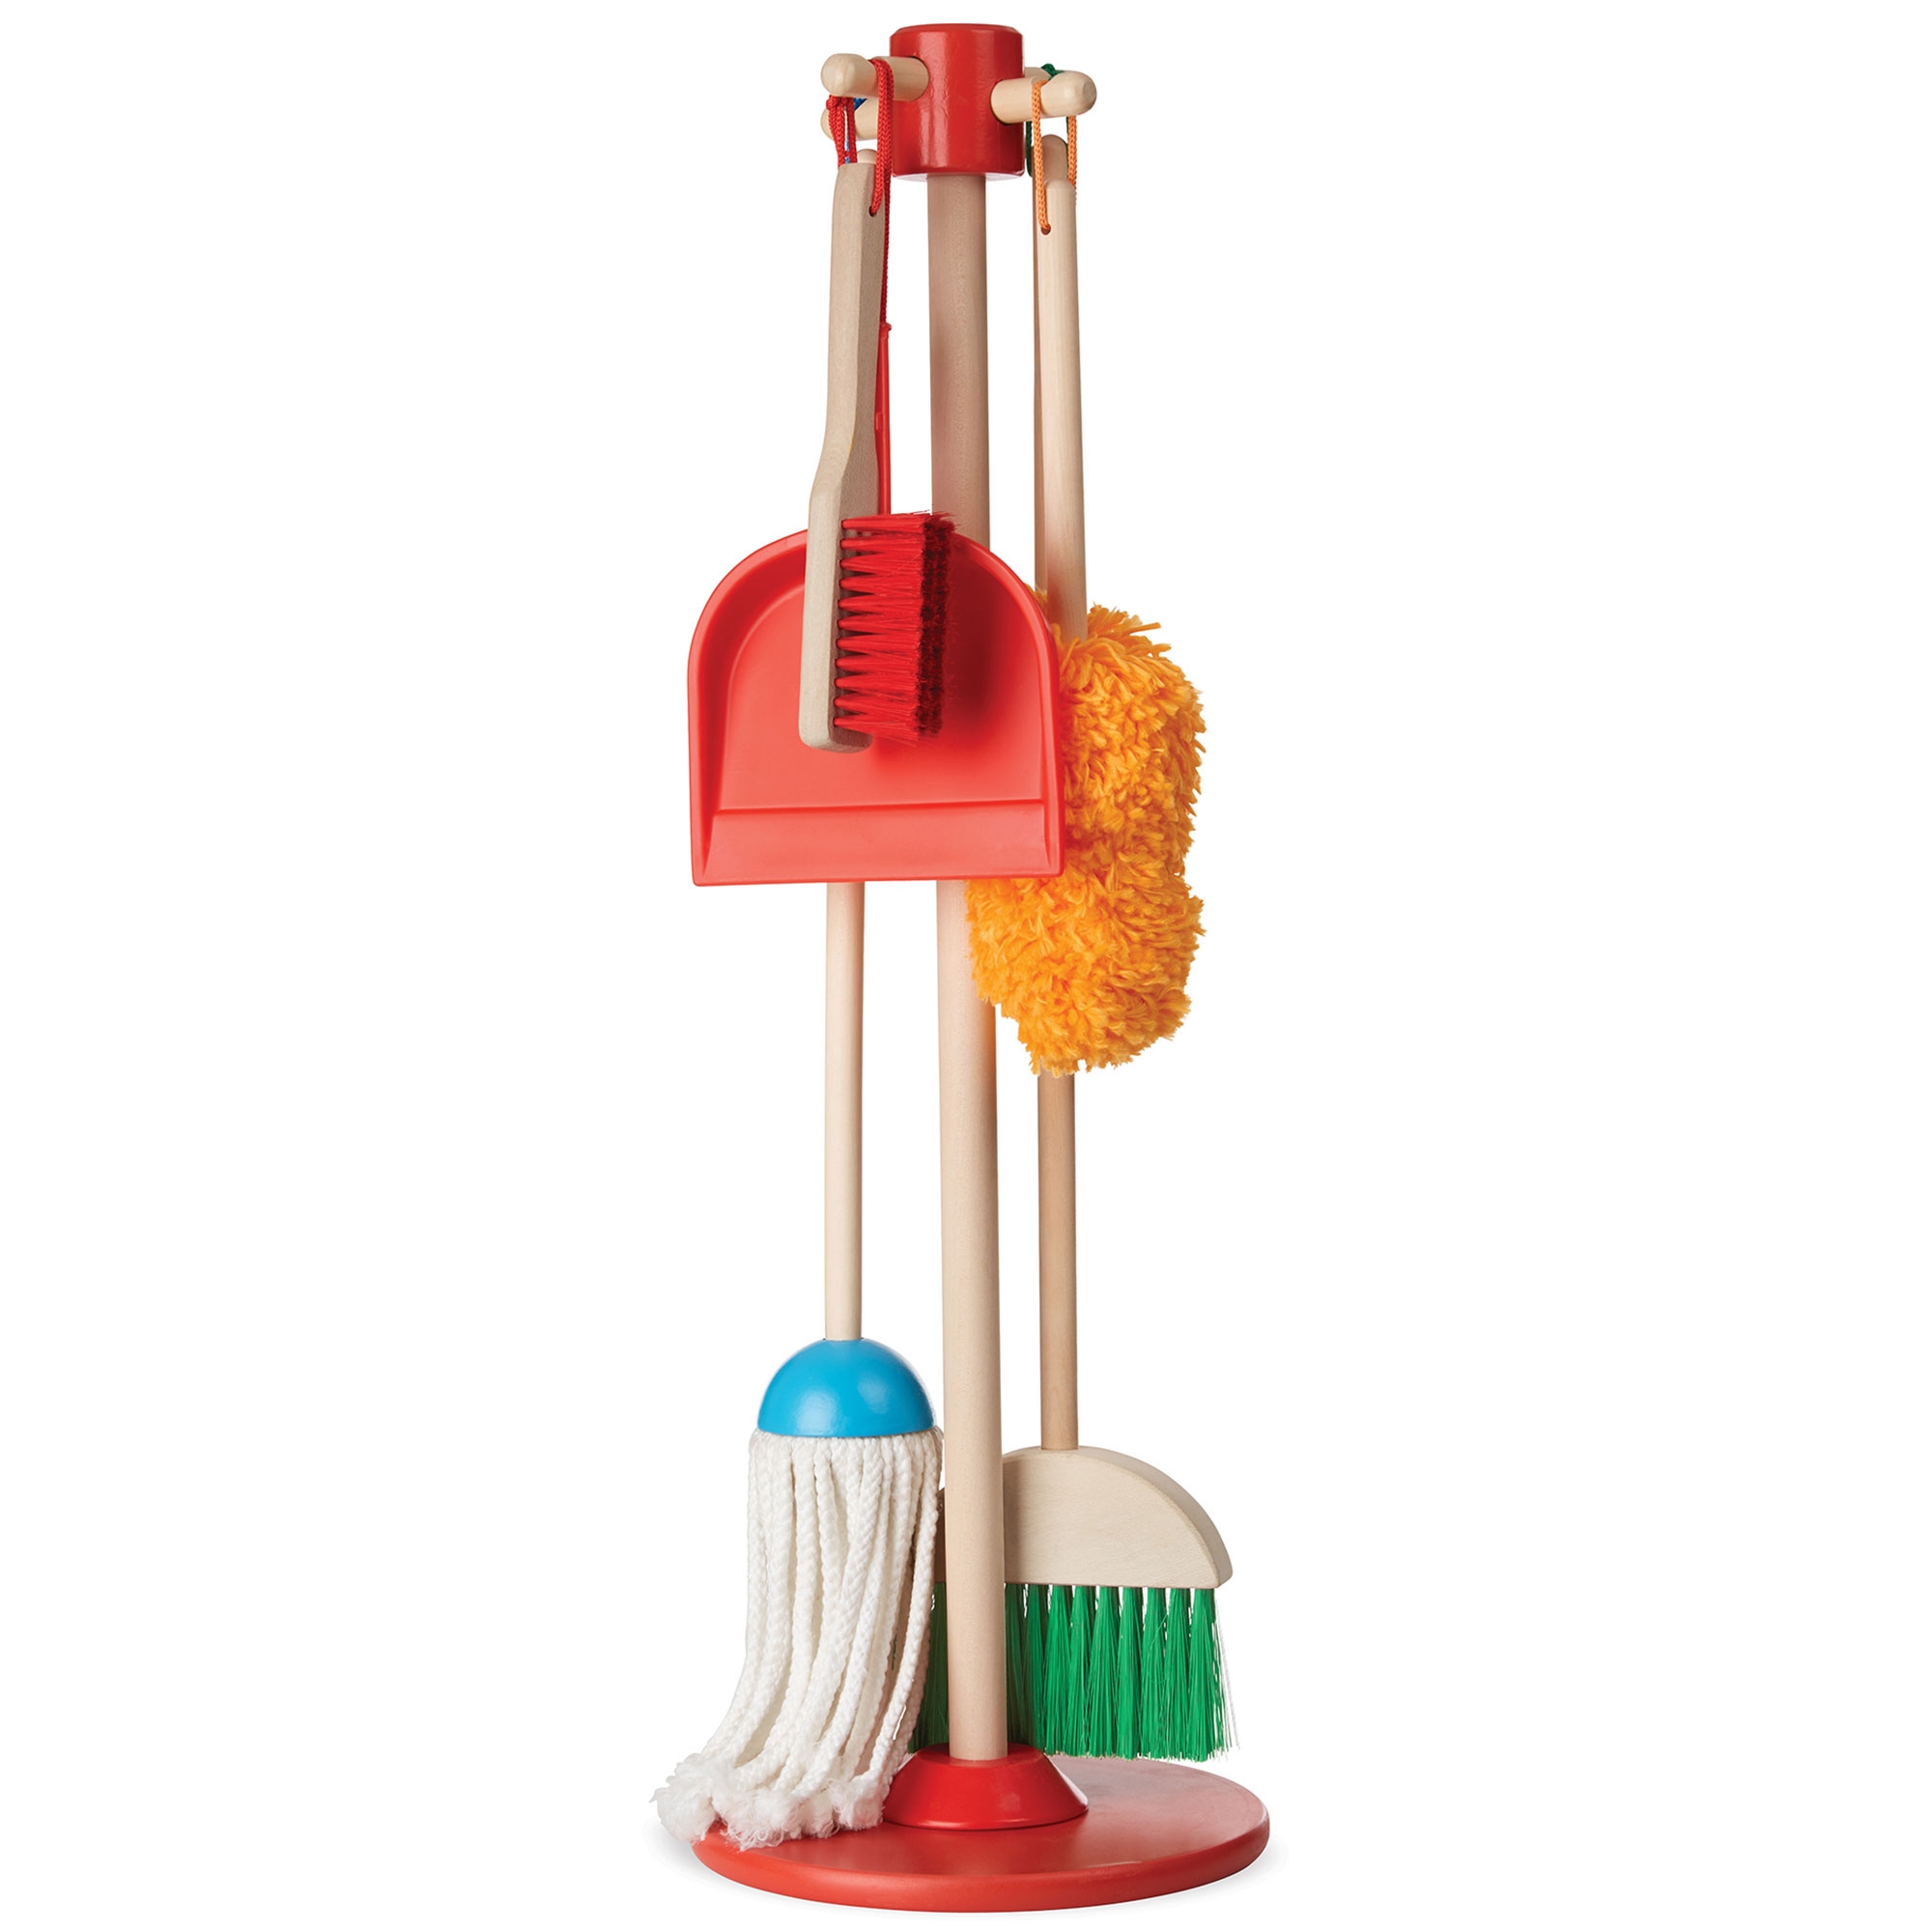 childrens cleaning set